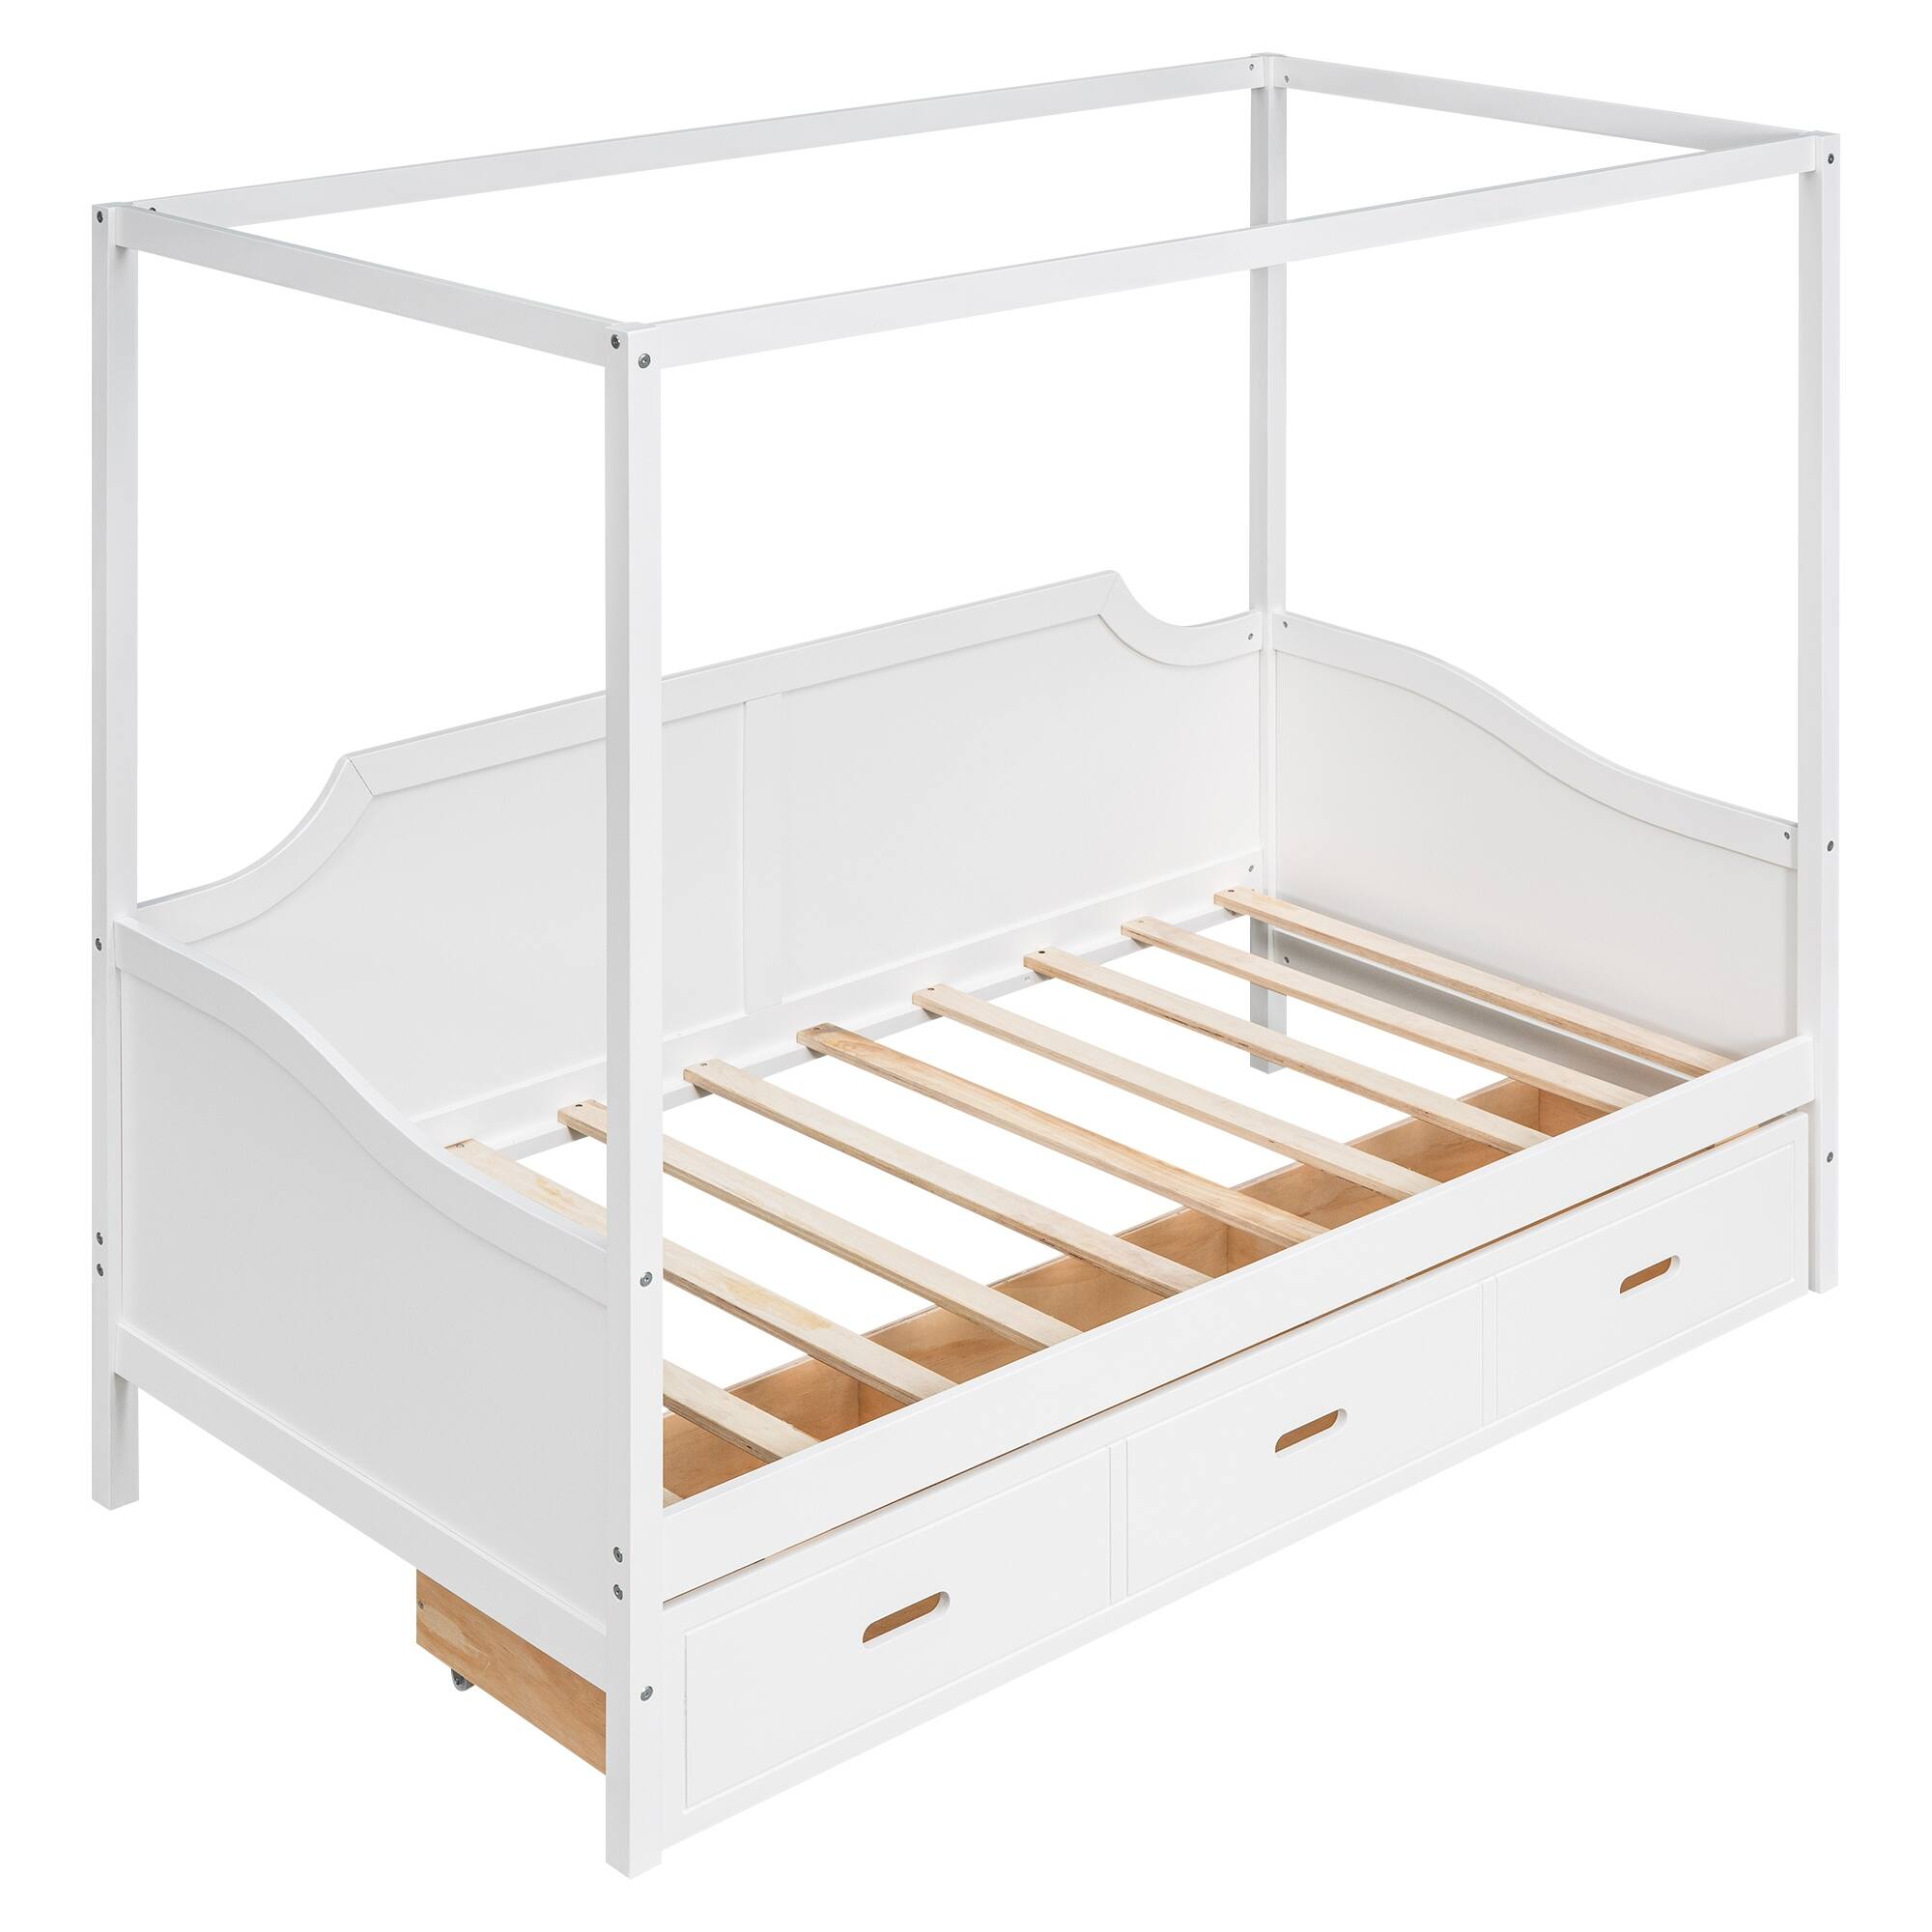 Twin Size Curved Style Canopy Bed Daybed with 3 Drawer-Like Compartments, 78''L*41.3''W*66.1''H, 94.5LBS